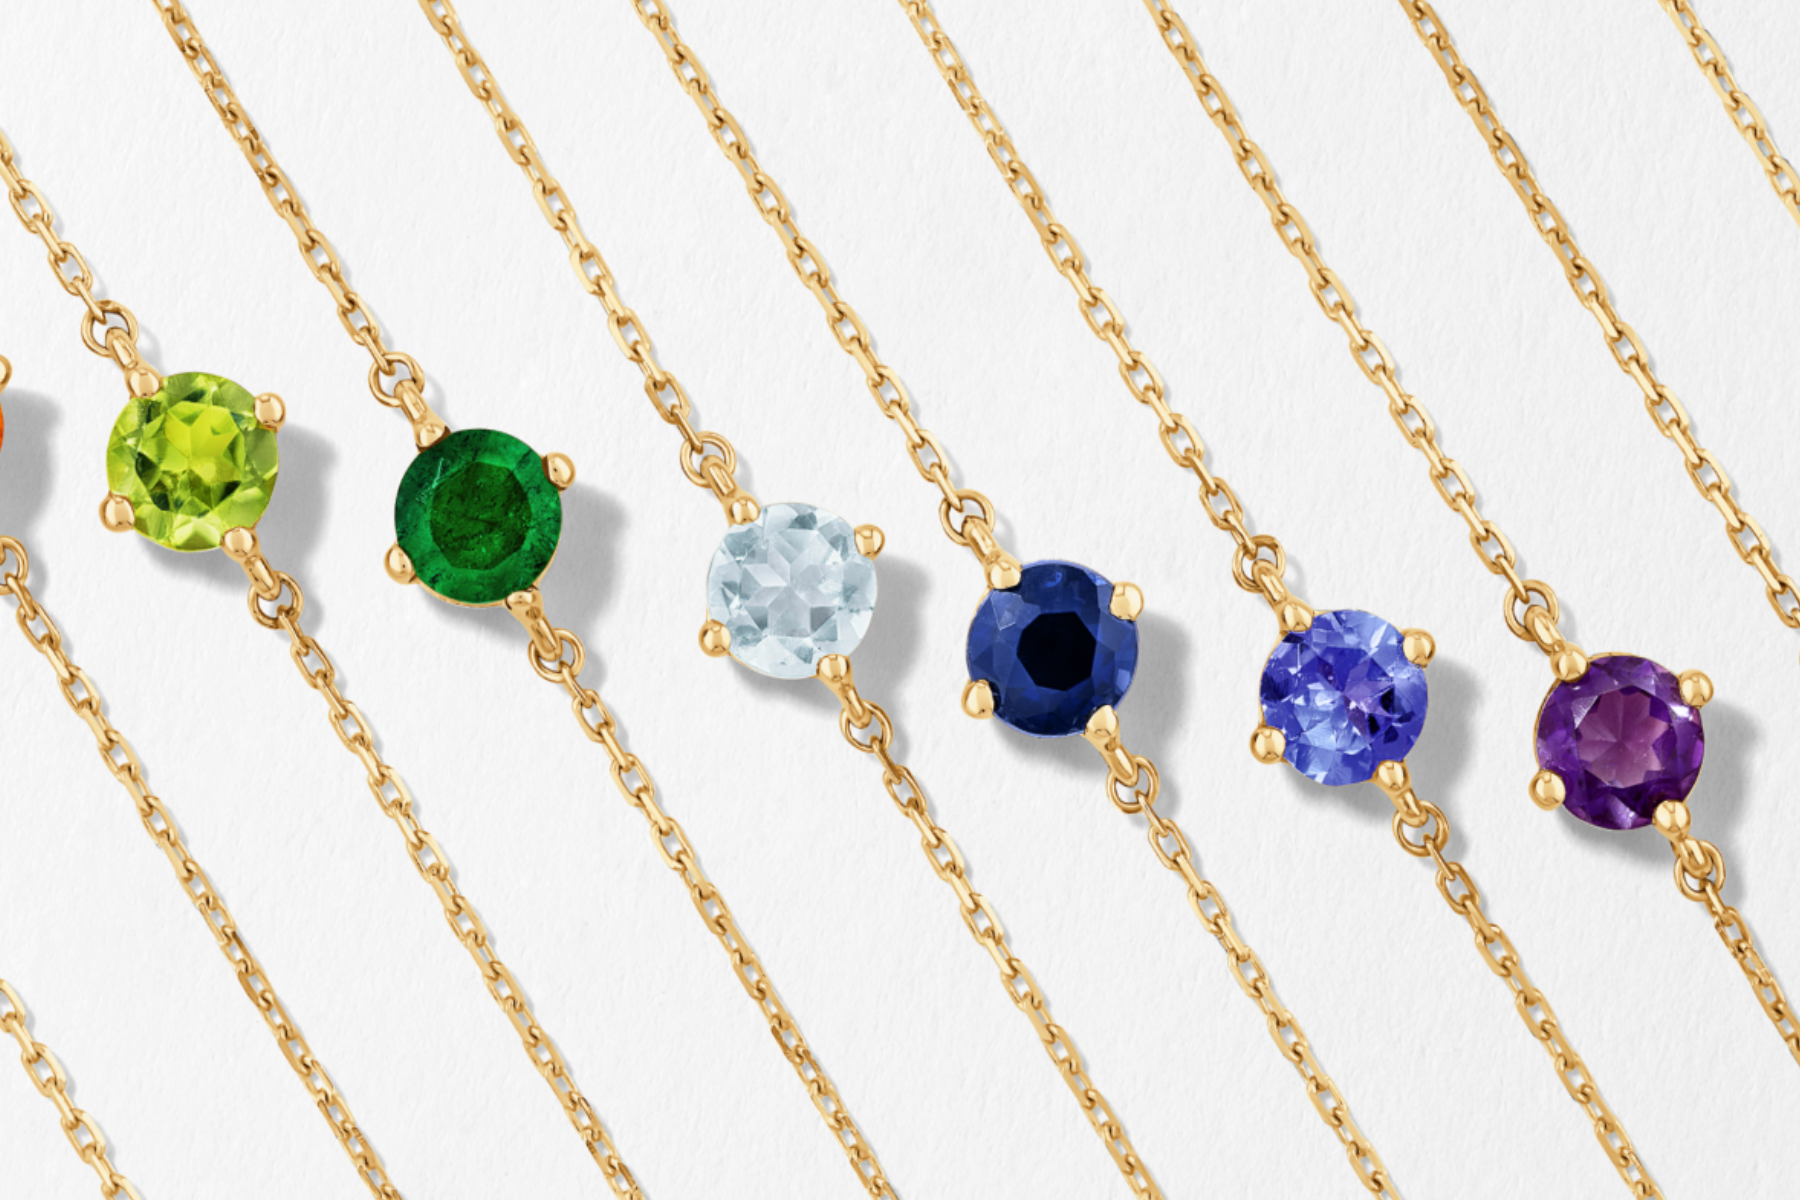 Birthstone Bracelets Jewelry - The Perfect Gift For Any Occasion